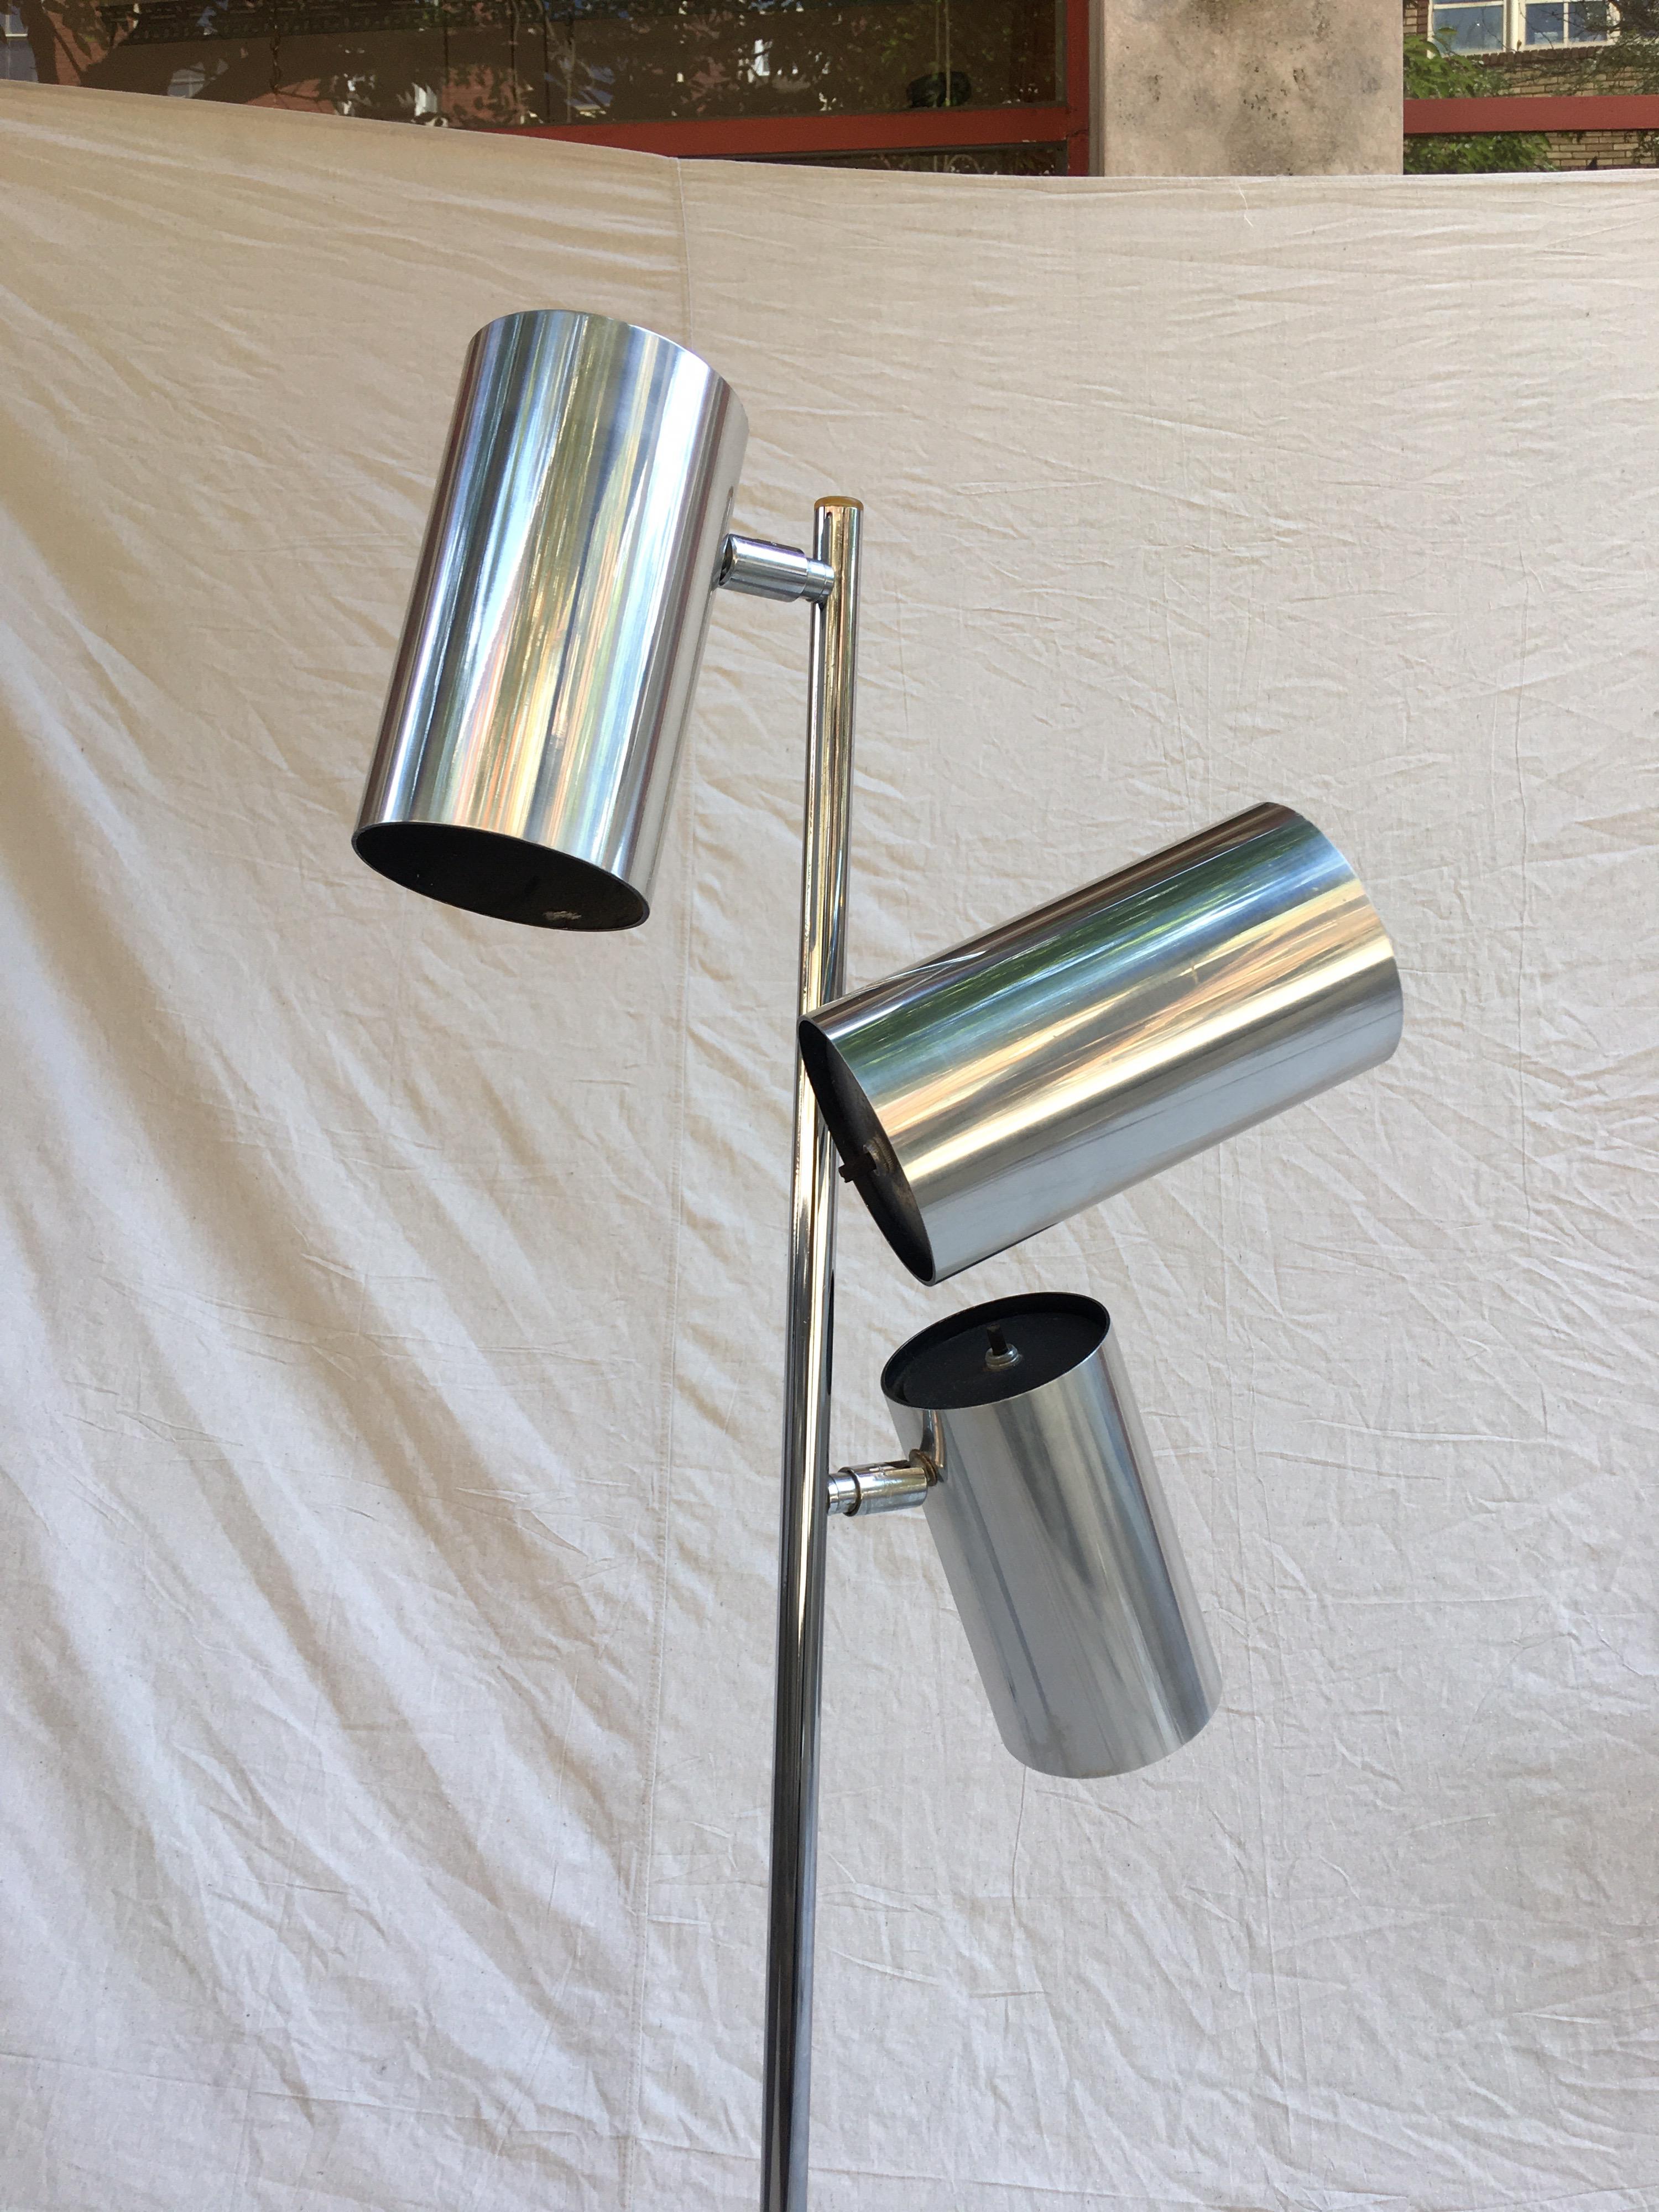 Kock and Lowy #-shade floor lamp, chrome base and pole with aluminum shades. All shades have a turn switch at top. Shades pivot in many directions to allow for lighting versatility!